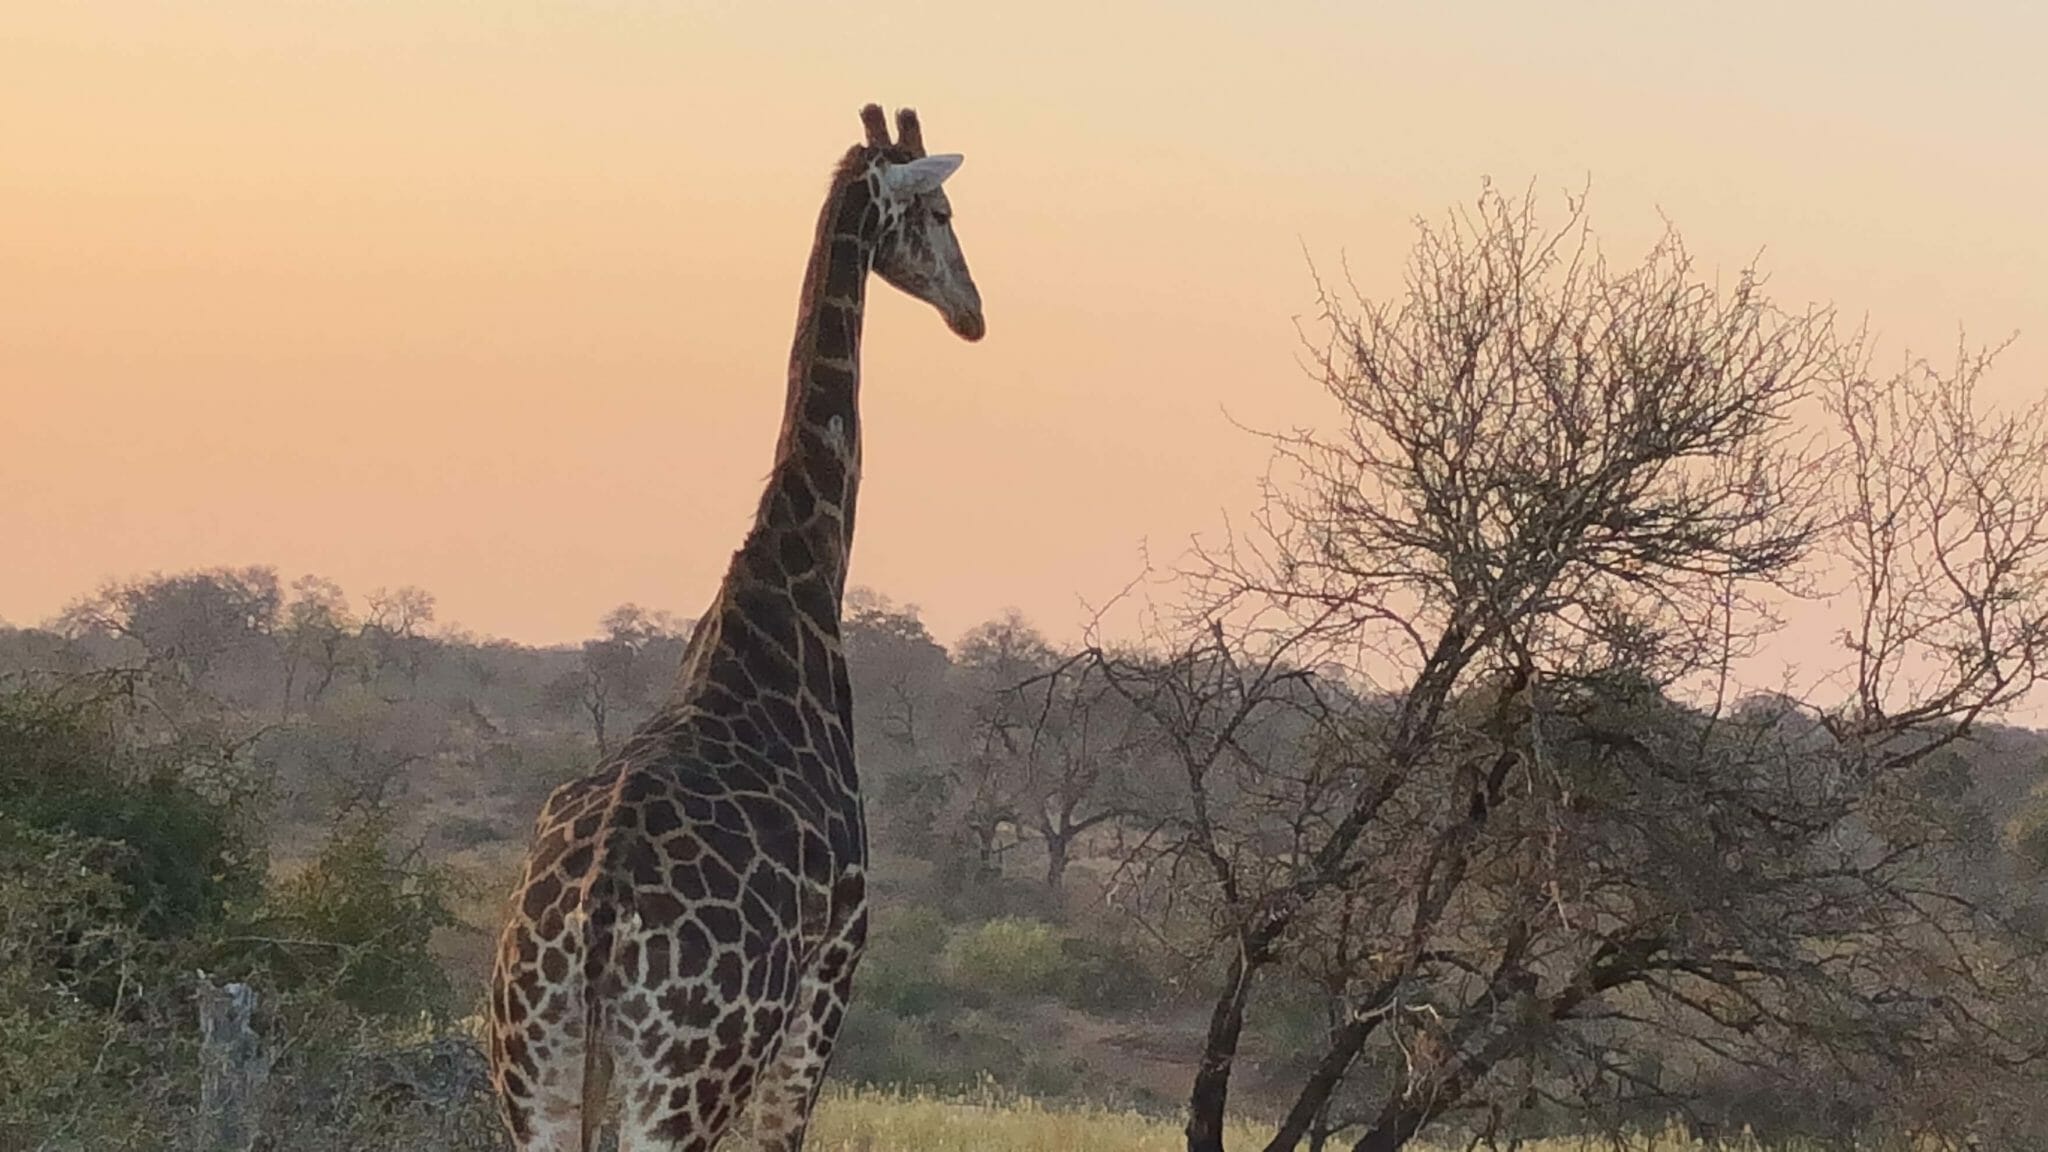 Giraffes are the supermodels of the bushes – they are tall, have long legs and huge eye browns.